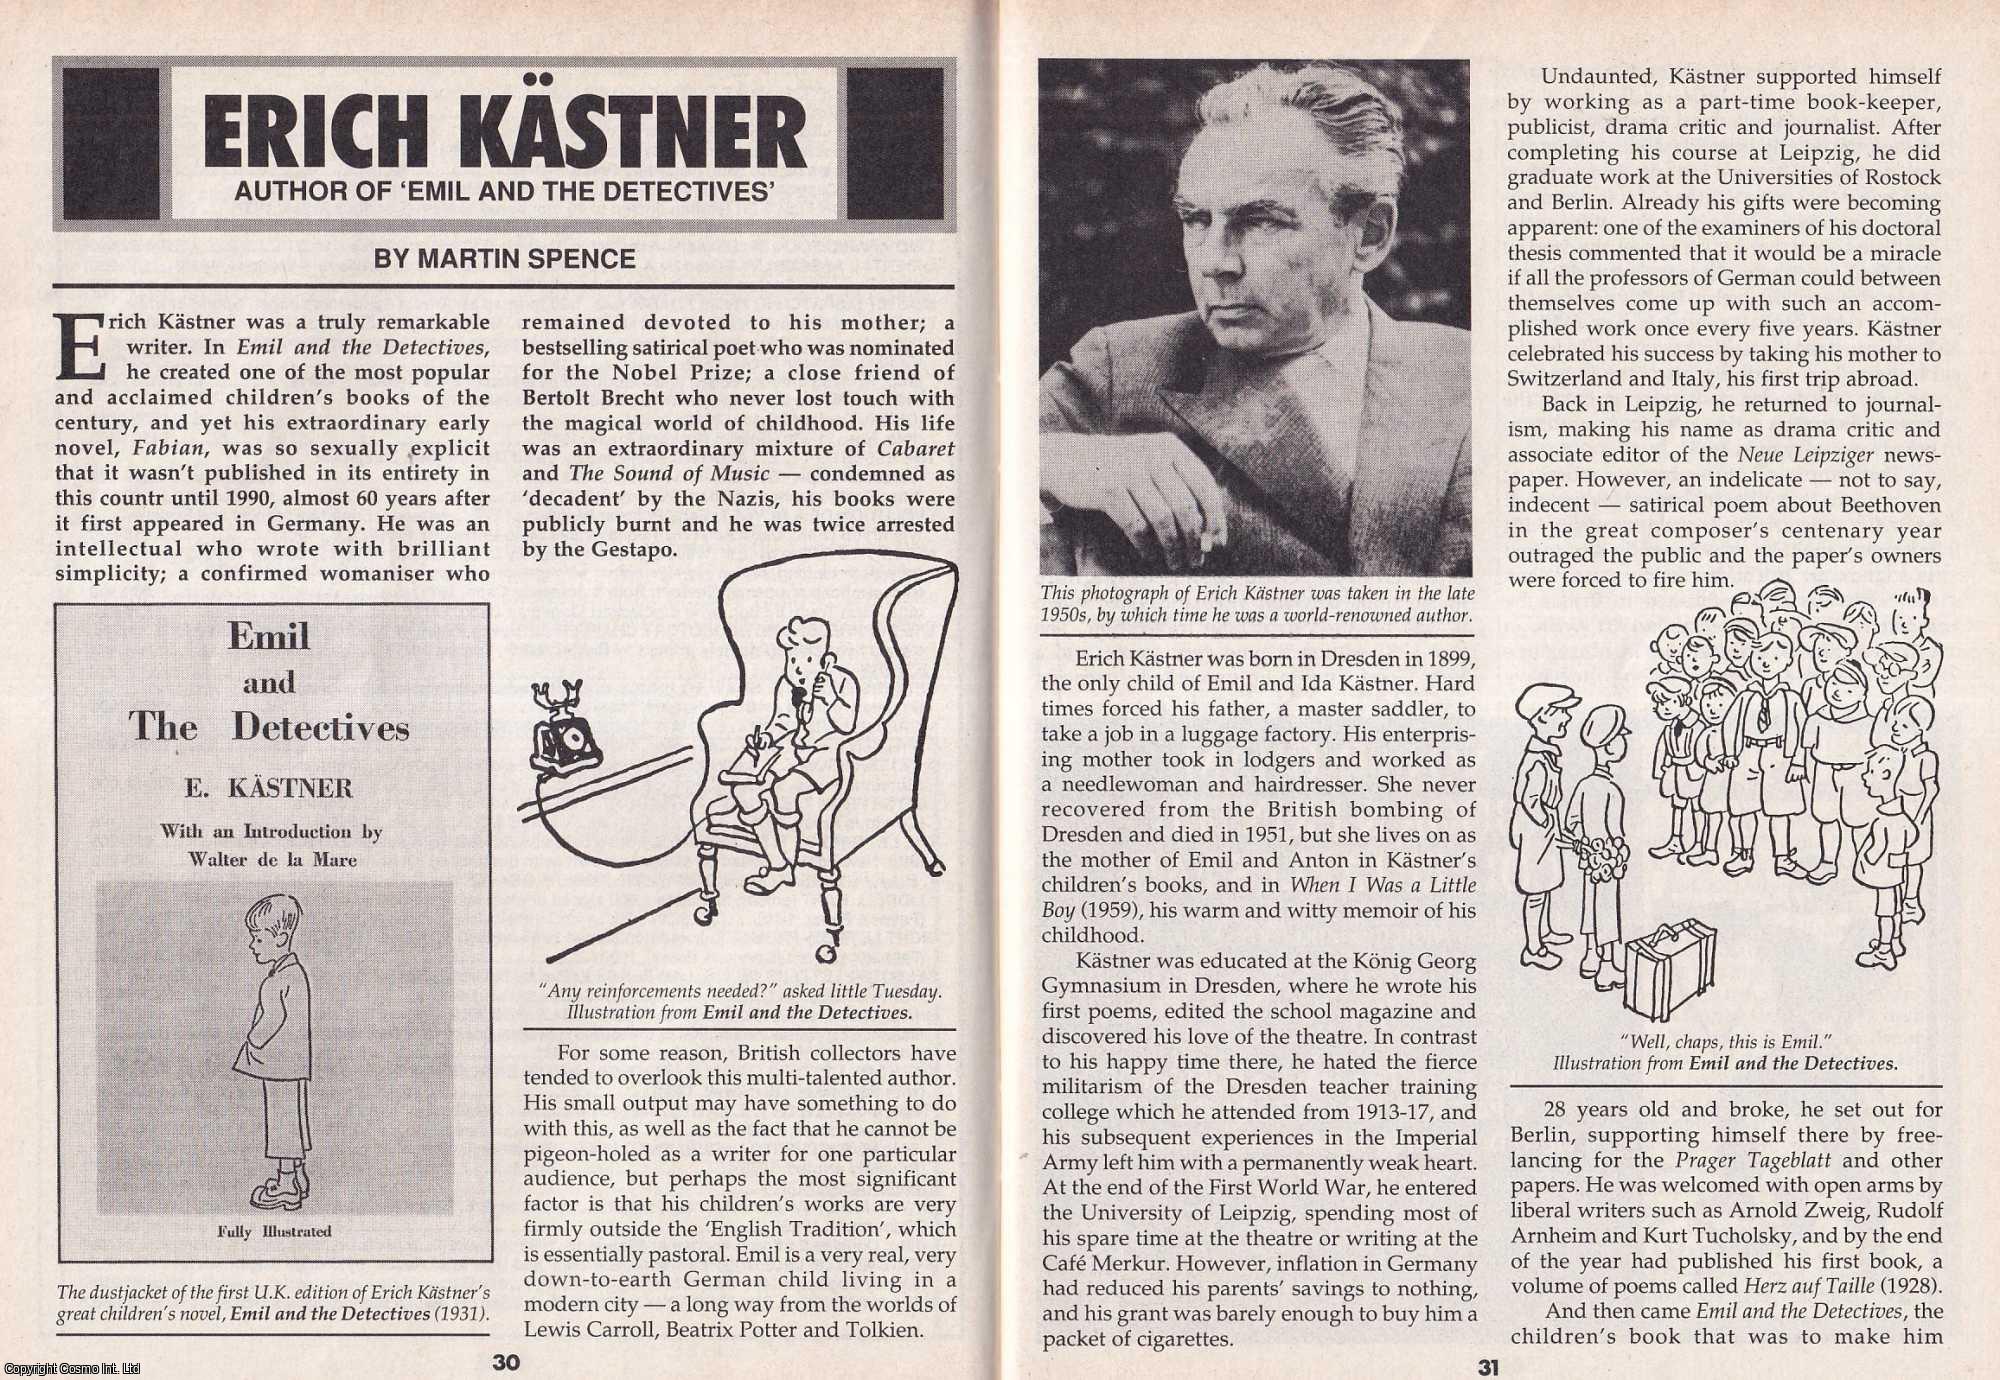 Martin Spence - Erich Kastner : Author of Emil & The Detectives. This is an original article separated from an issue of The Book & Magazine Collector publication.